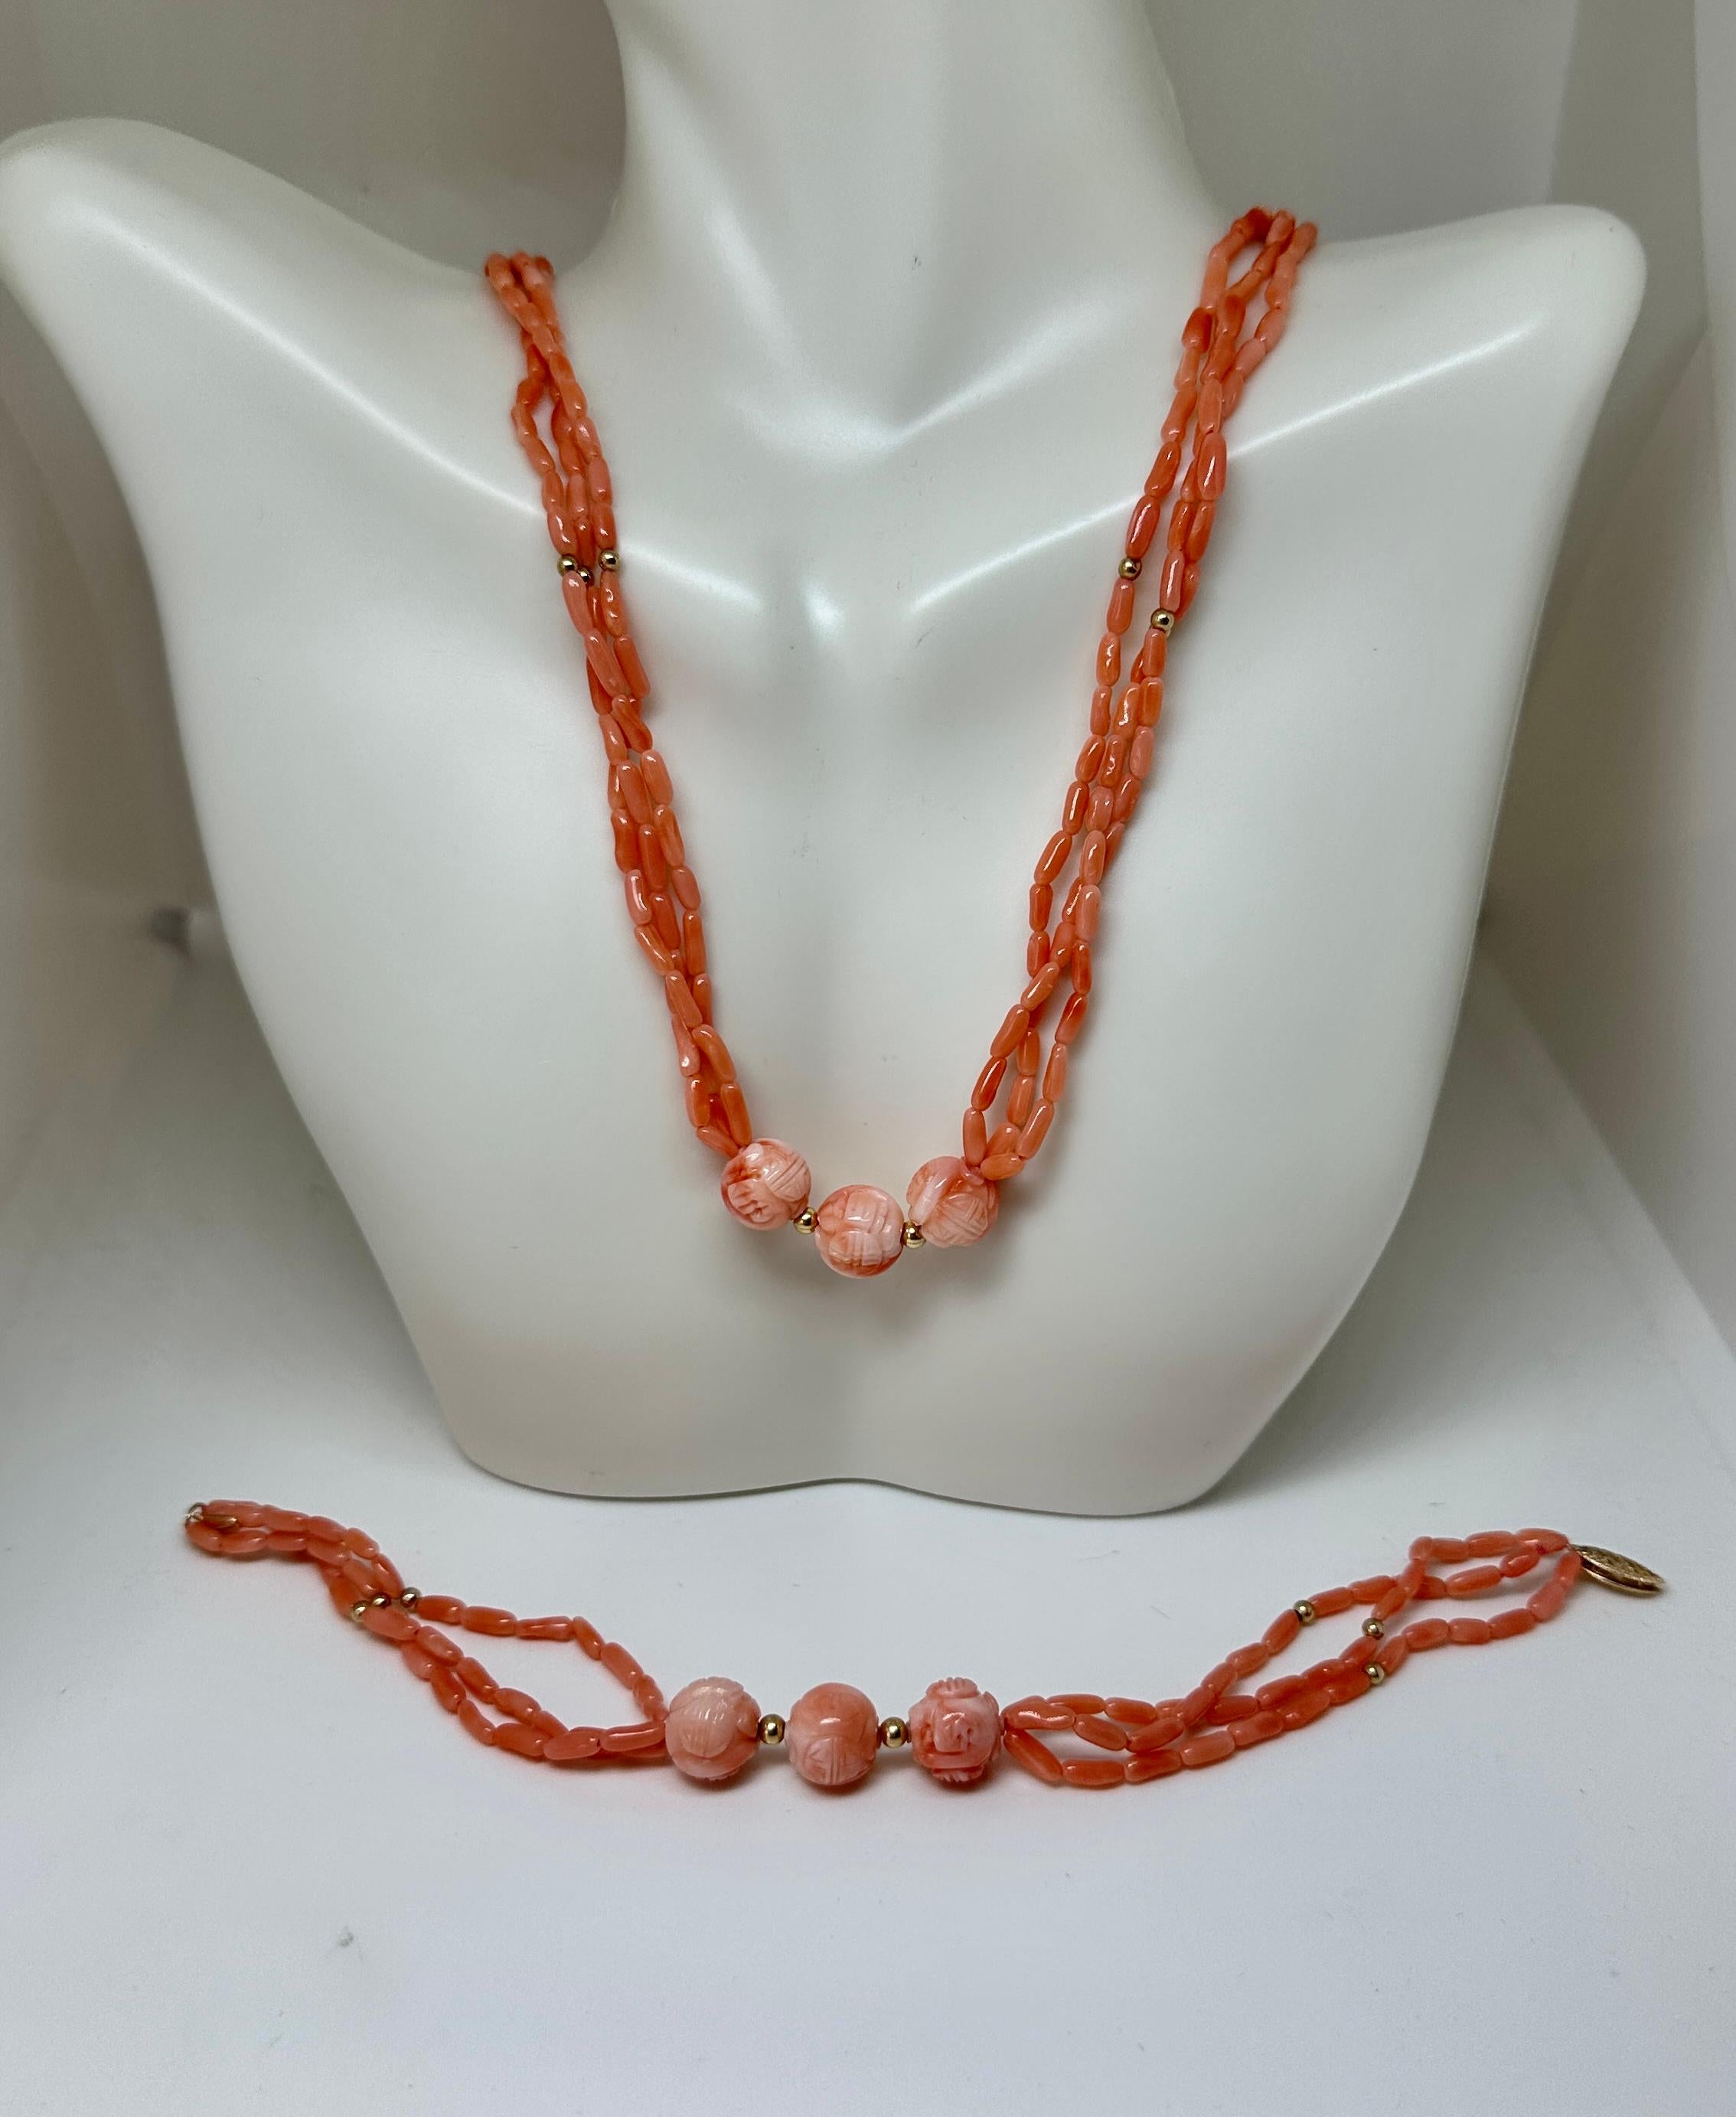 This is a stunning antique salmon colored Coral and 14 Karat Gold three strand Torsade Necklace and Bracelet with beautiful hand carved Coral beads of great beauty.  The clasps are 14 Karat Yellow Gold.   The combination of the pink salmon coral